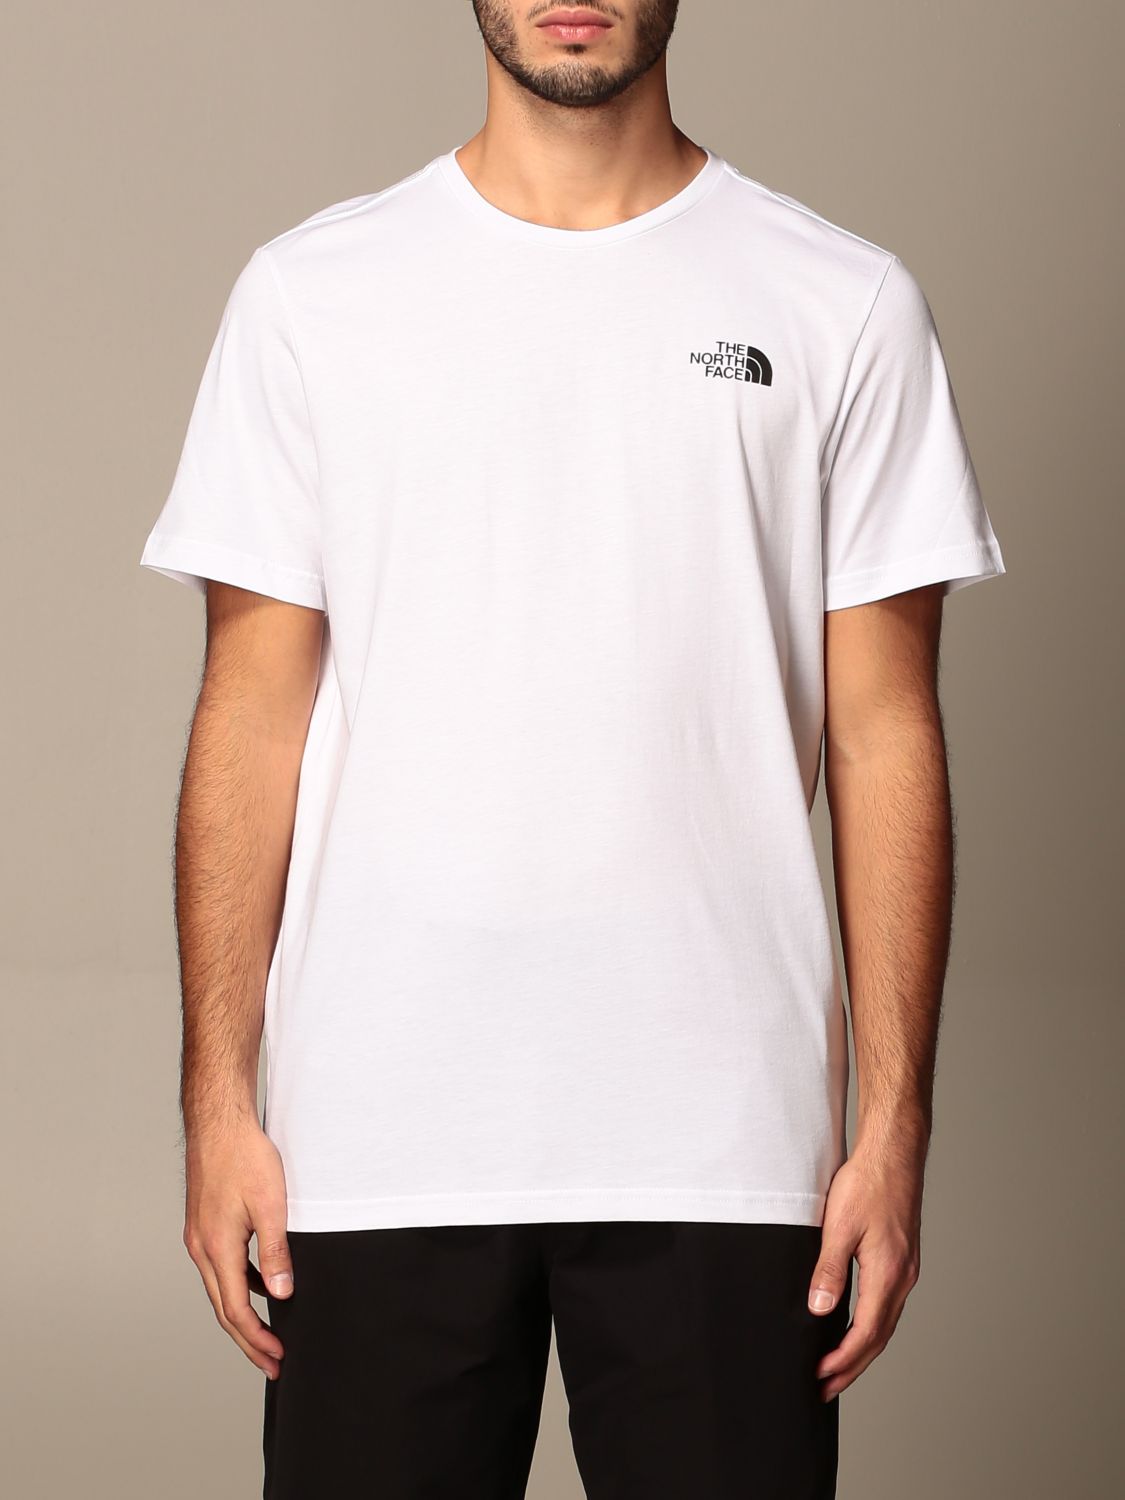 T-Shirt The North Face NF0A4M6O Giglio EN